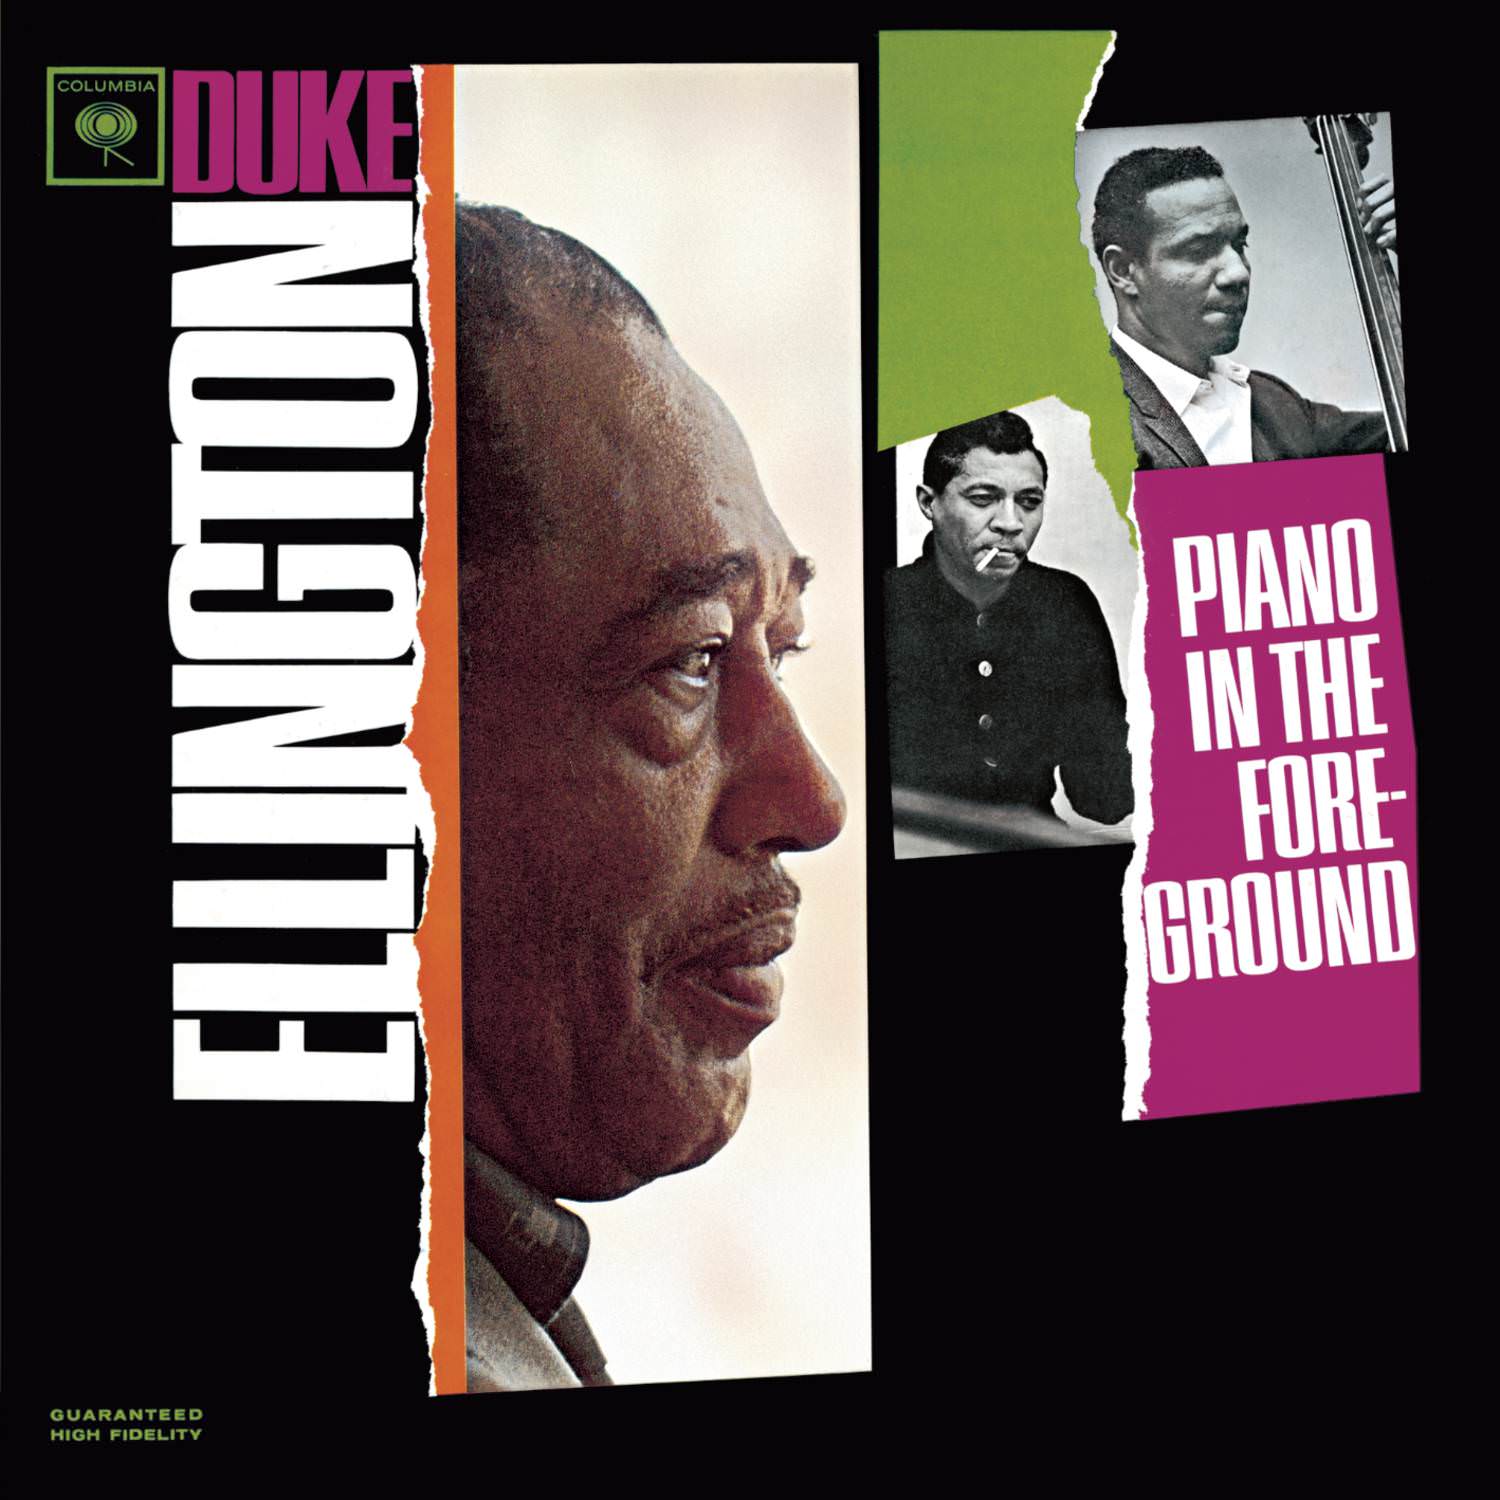 Duke Ellington - Piano In The Foreground (1961/2016) [AcousticSounds DSF DSD64/2,82MHz + FLAC 24bit/88,2kHz]